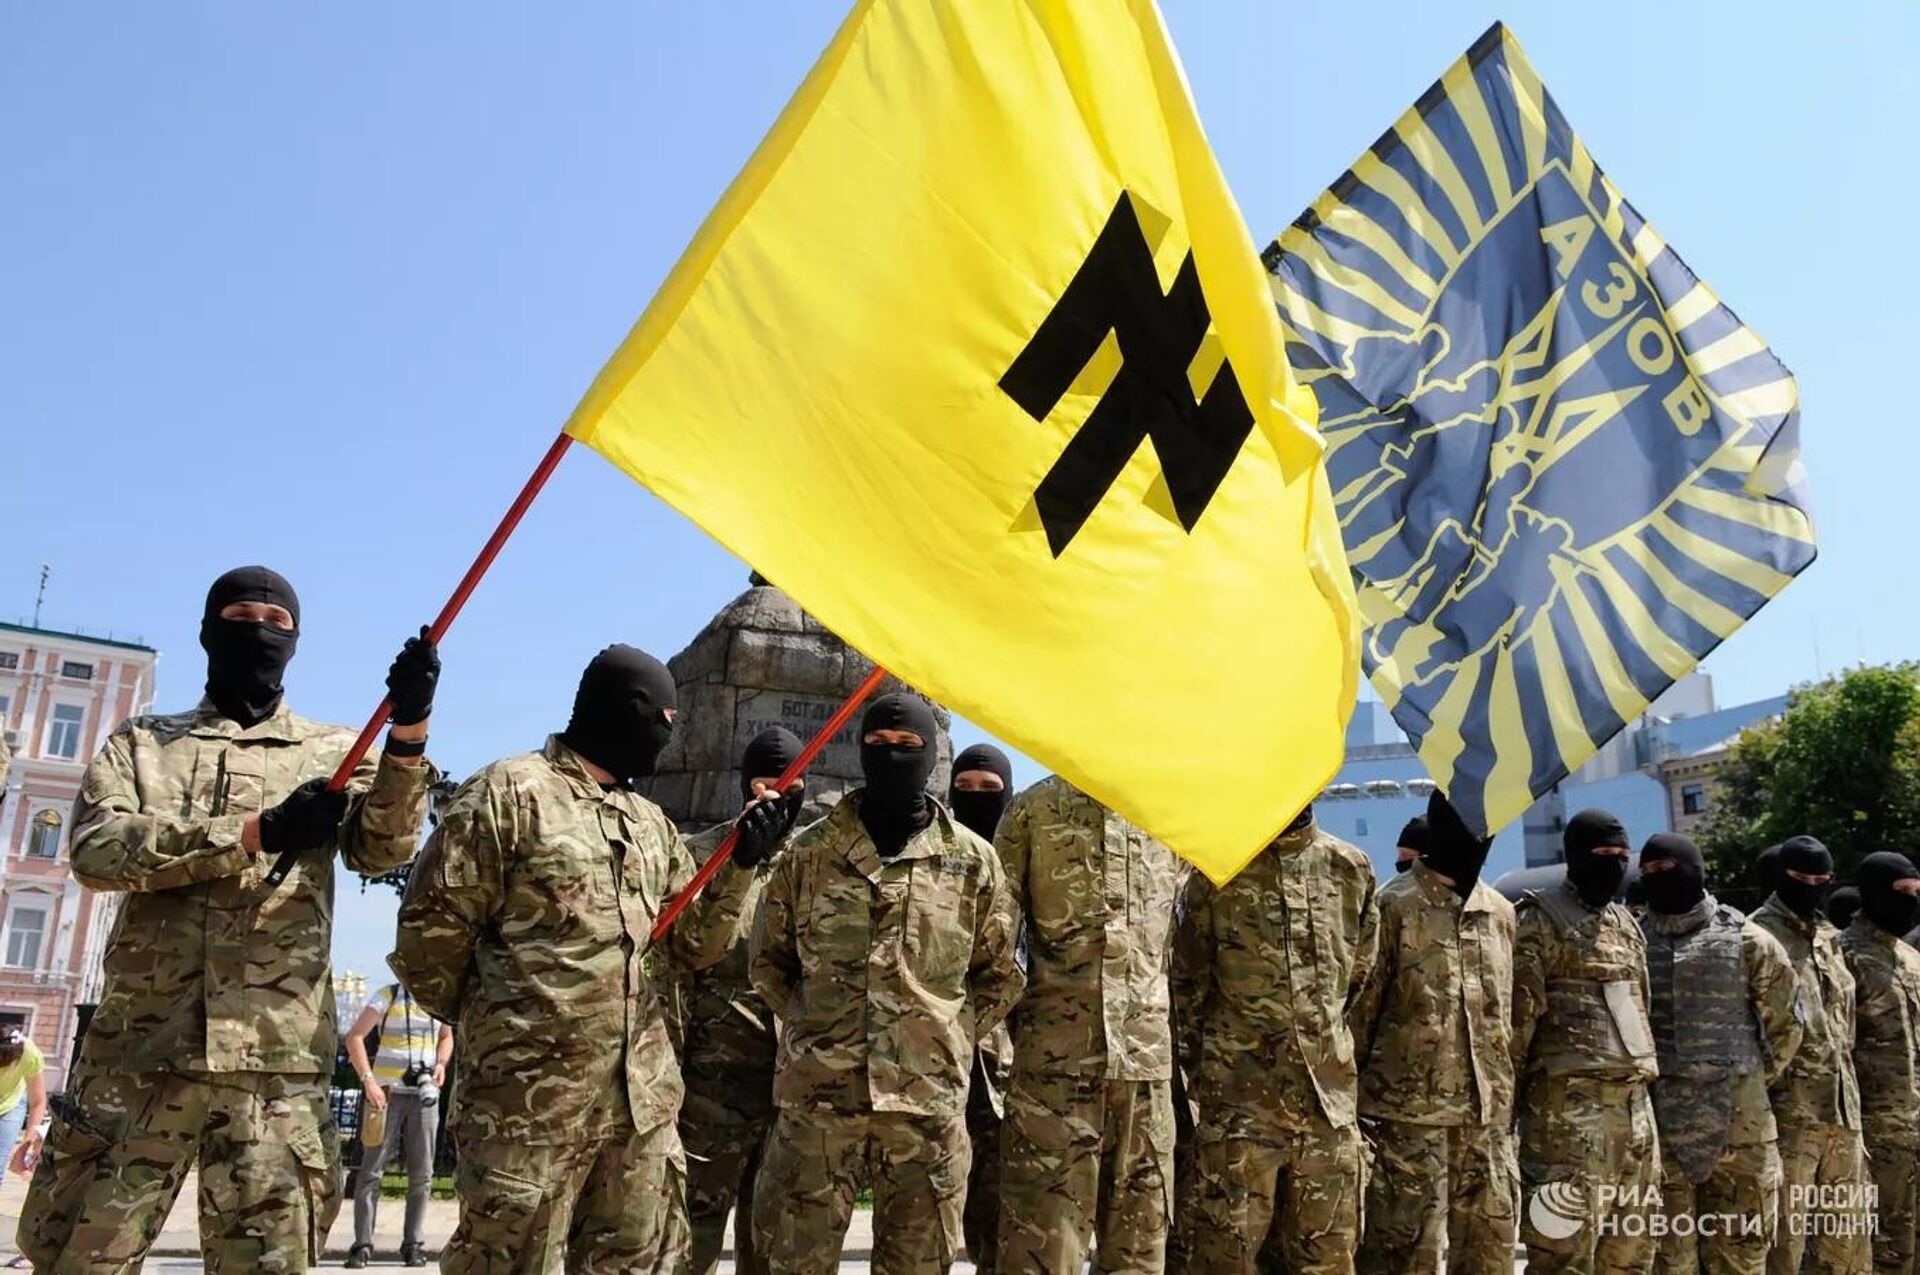 Fighters of the neo-Nazi Azov Battalion take the oath of allegiance to Ukraine in Sophia Square in Kiev before being sent to Donbass. Members of the Nazi battalion have committed hundreds of war crimes against the population of Donbass over eight years. The Azov flag has an inverted image of the runic symbol “Wolfsangel”, which was used by the Nazis. - Sputnik International, 1920, 31.05.2022